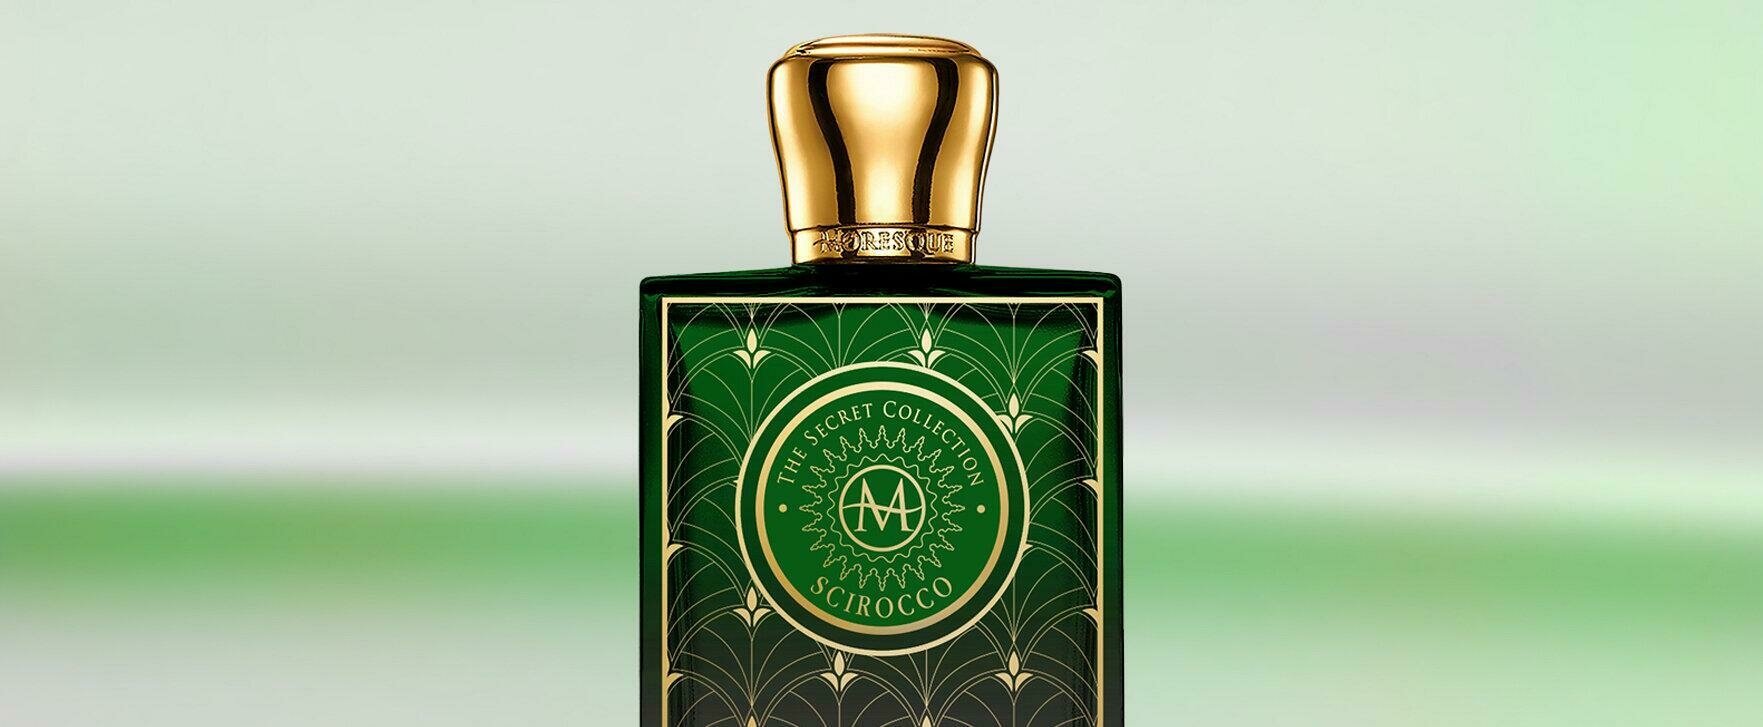 The Olfactory Journey Into the Desert: “The Secret Collection - Scirocco” by Moresque